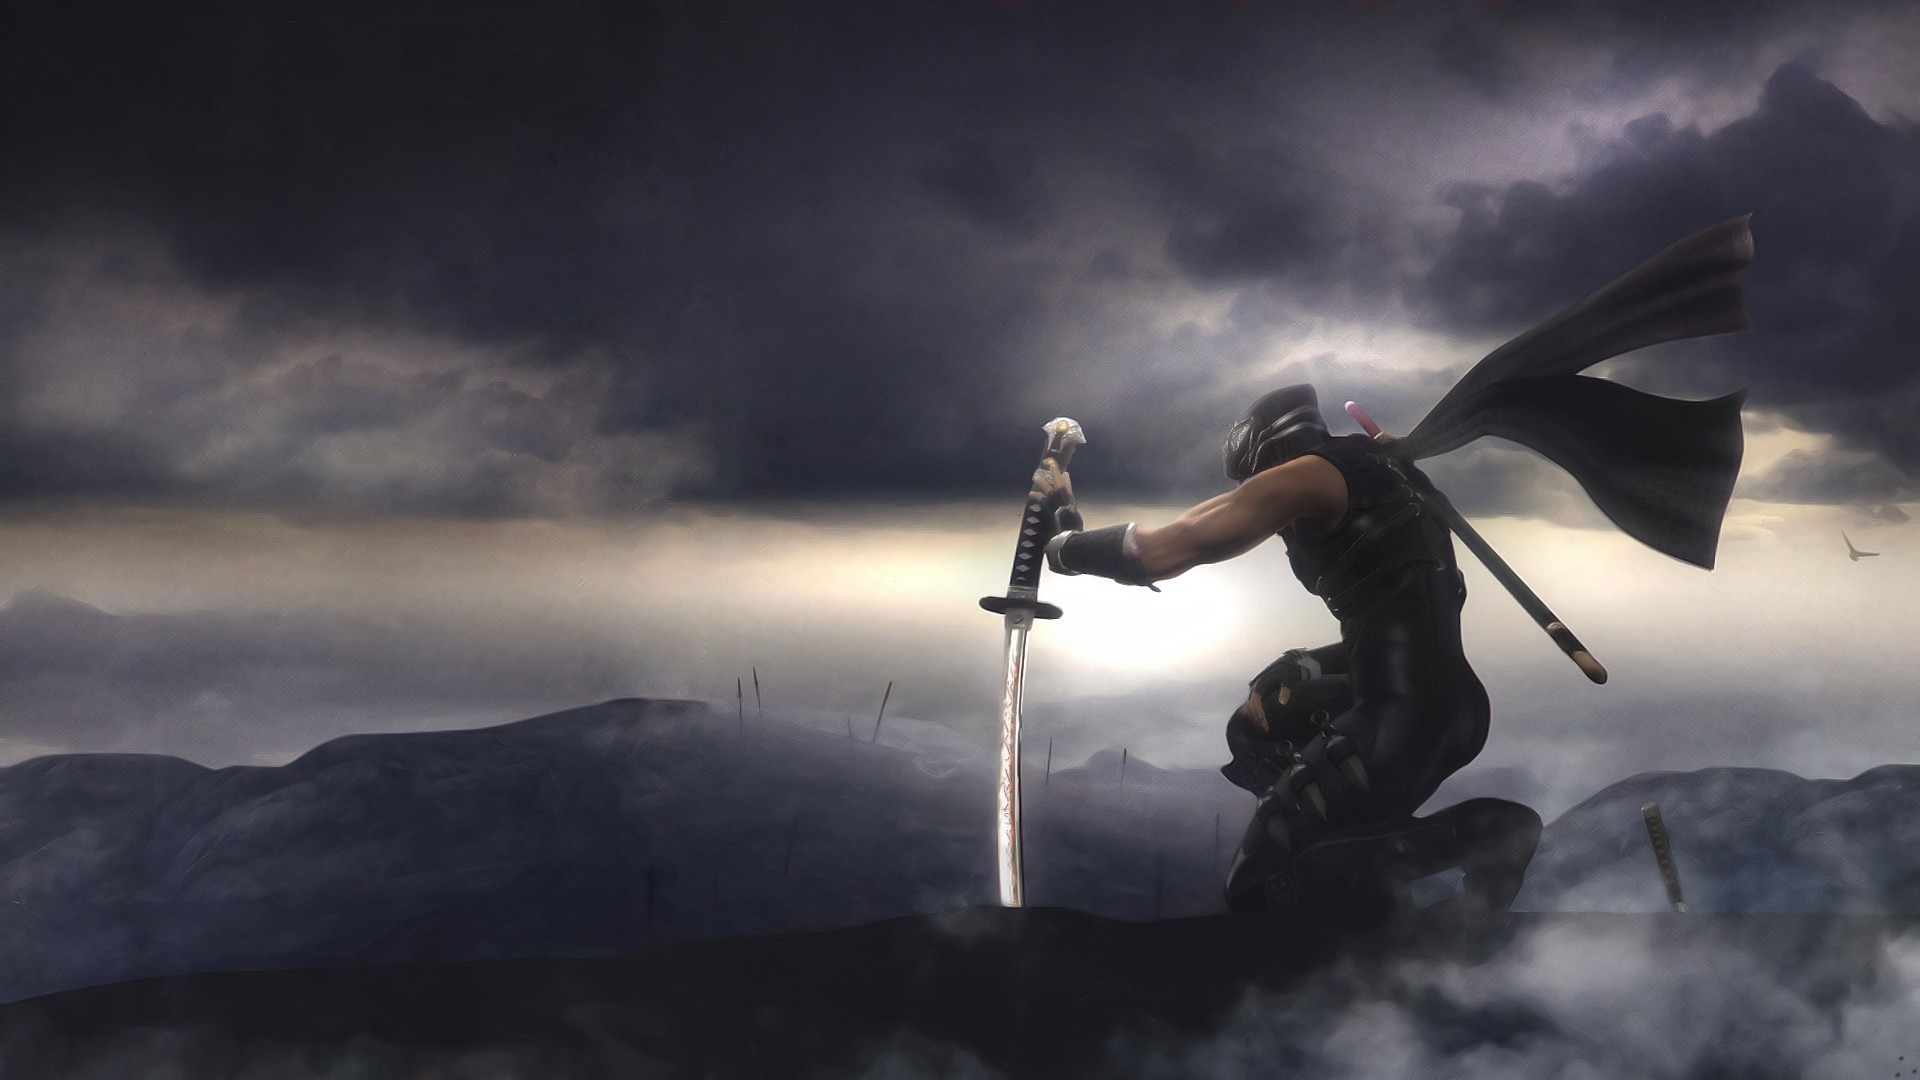 1920x1080 Find out: Ryu Hayabusa in Ninja Gaiden 3 wallpaper on http .